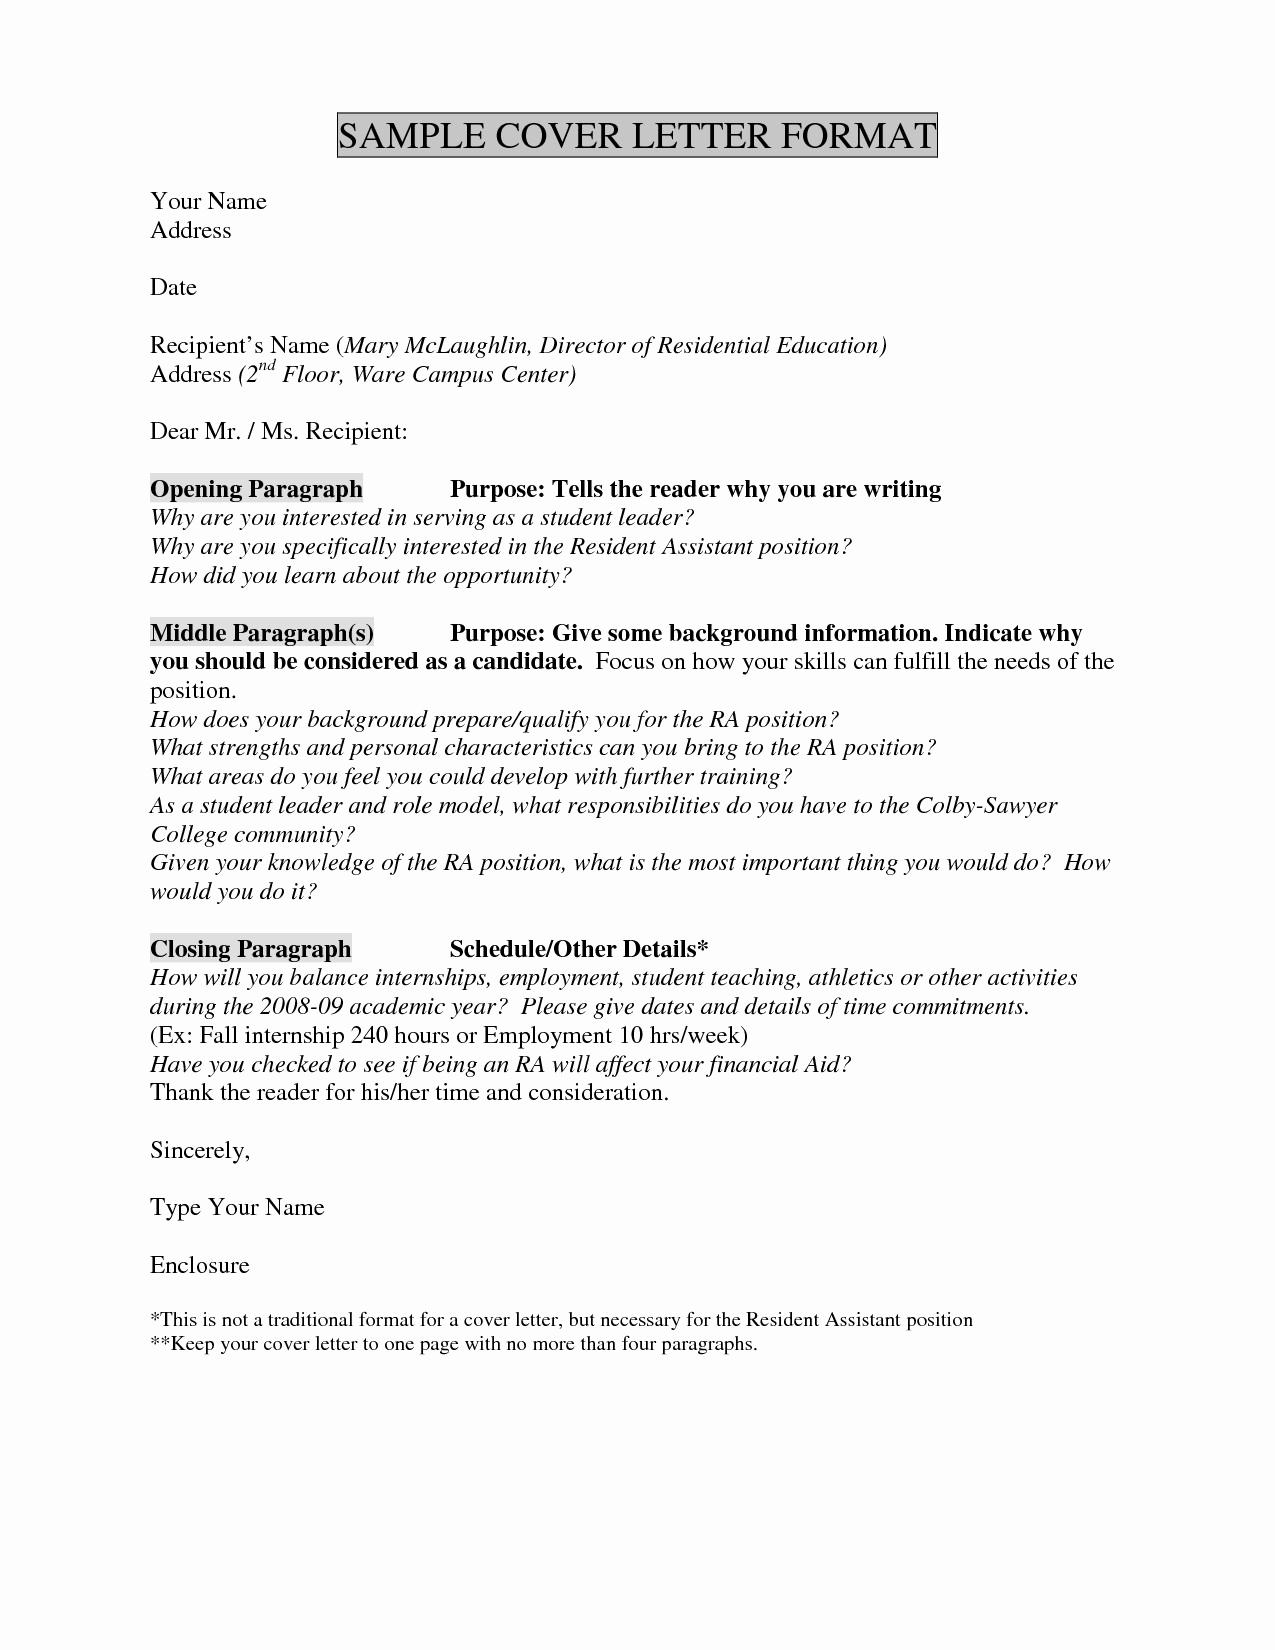 Traditional Cover Letter Template - How to Open A Cover Letter Luxury Unique if I Apply to More Than E